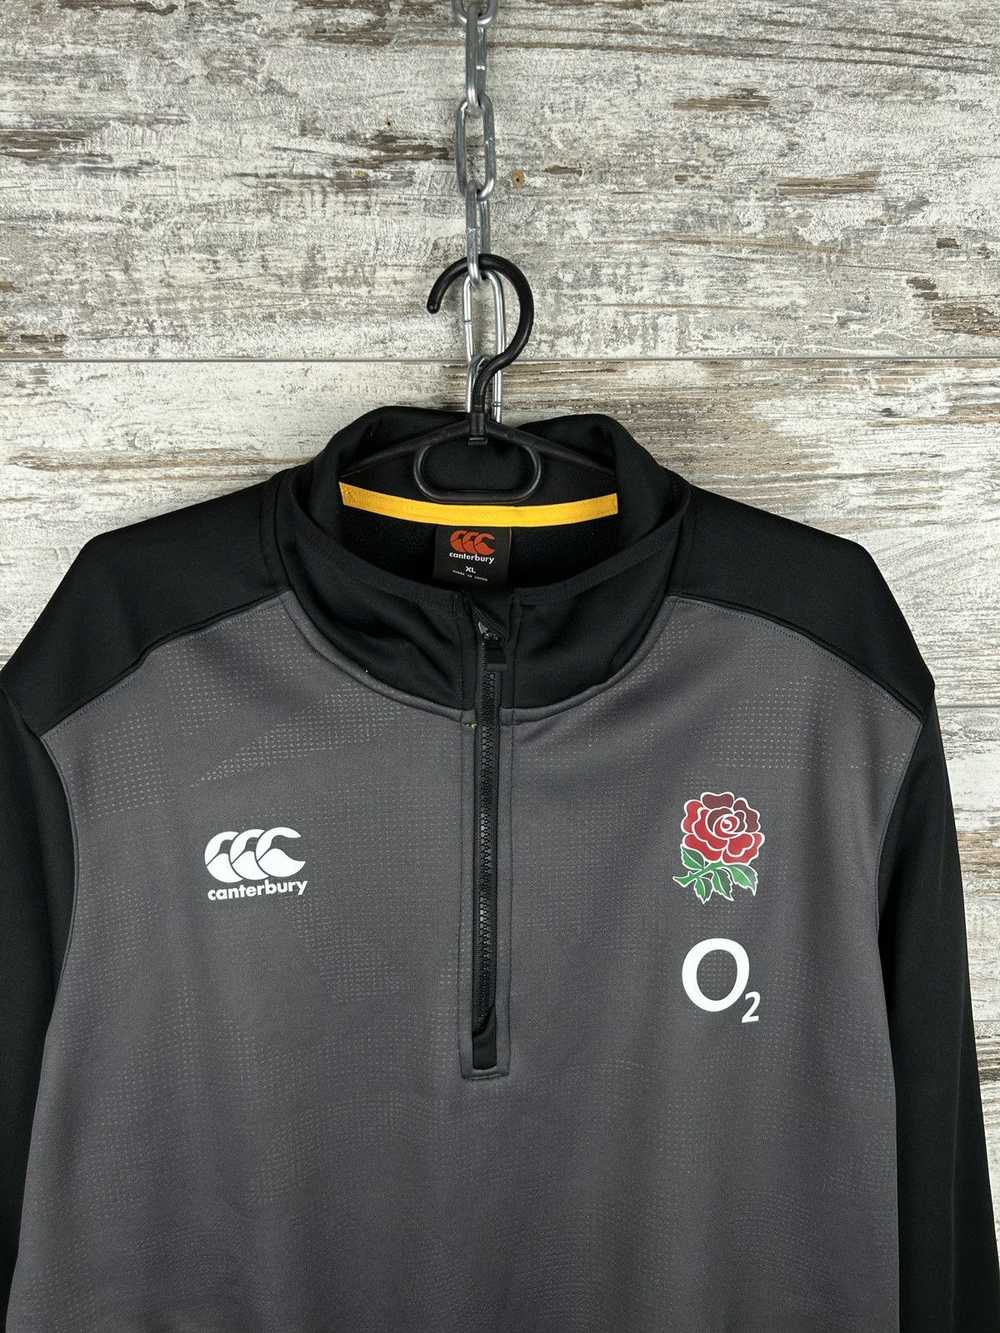 Canterbury Of New Zealand × England Rugby League … - image 2